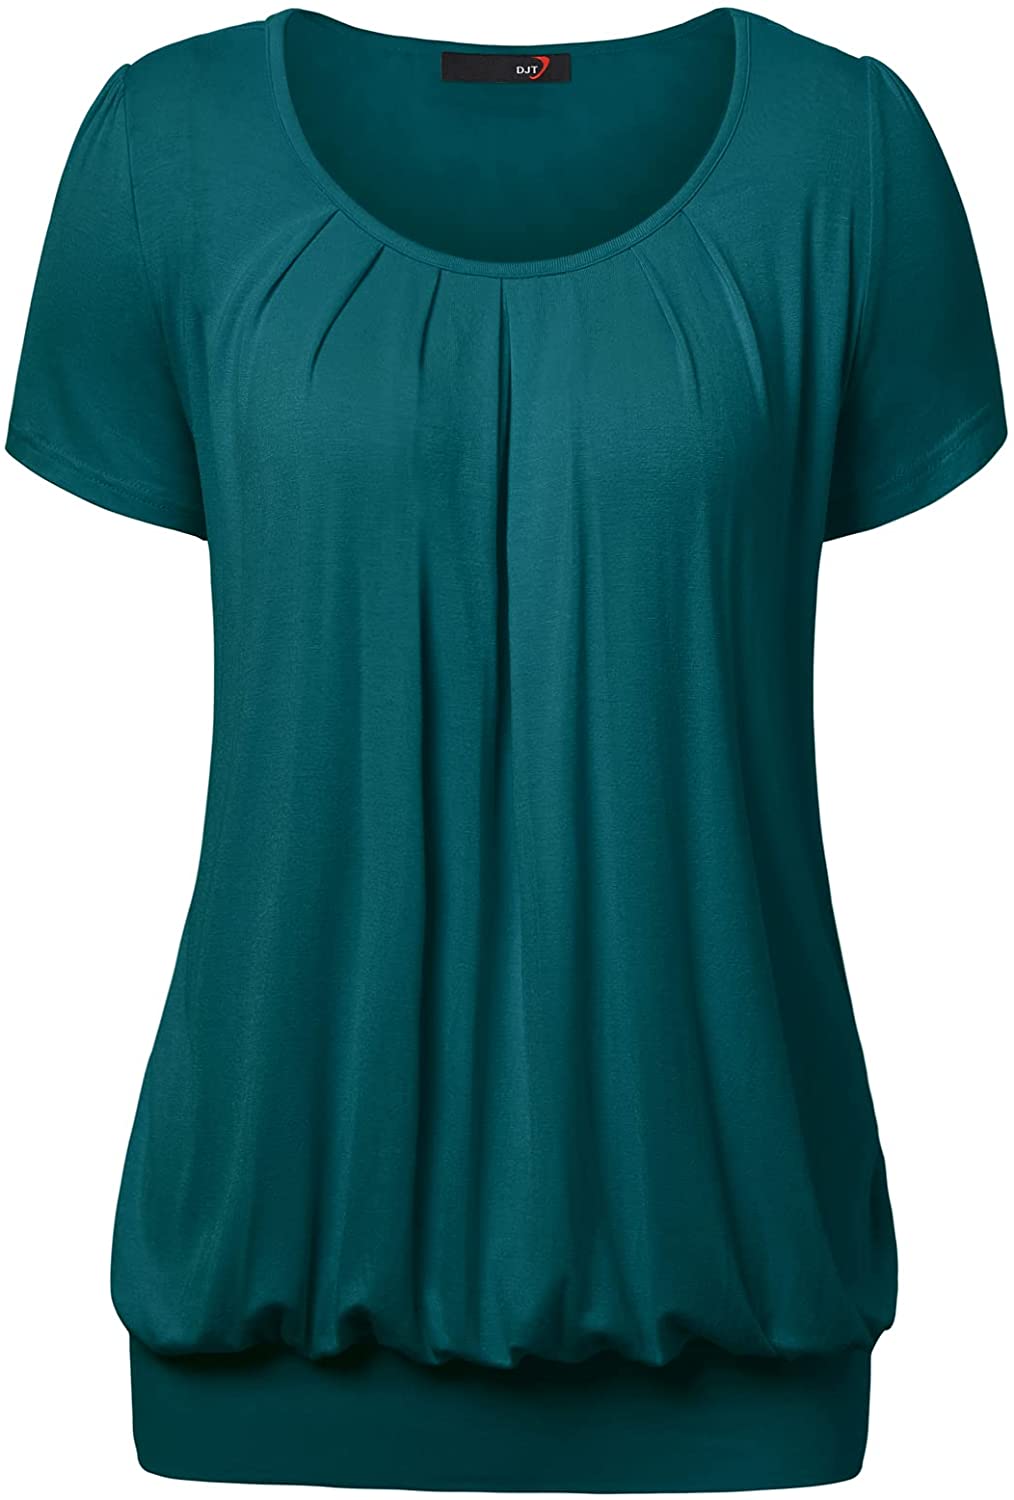 DJT Womens Scoop Neck Short Sleeve Front Pleated Tunic